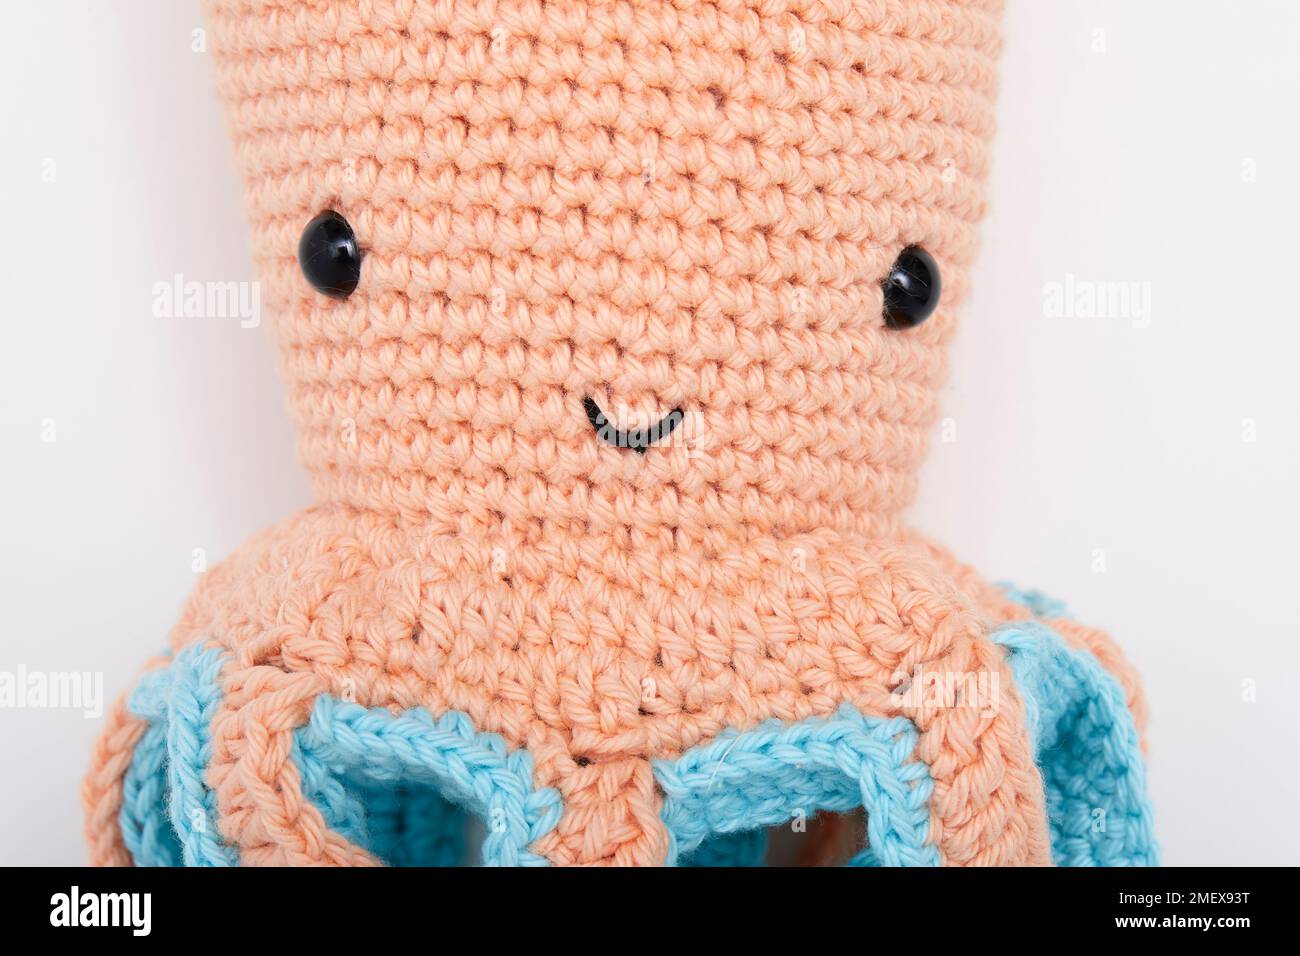 Crochet project-Hanging octopus toy, detail Stock Photo